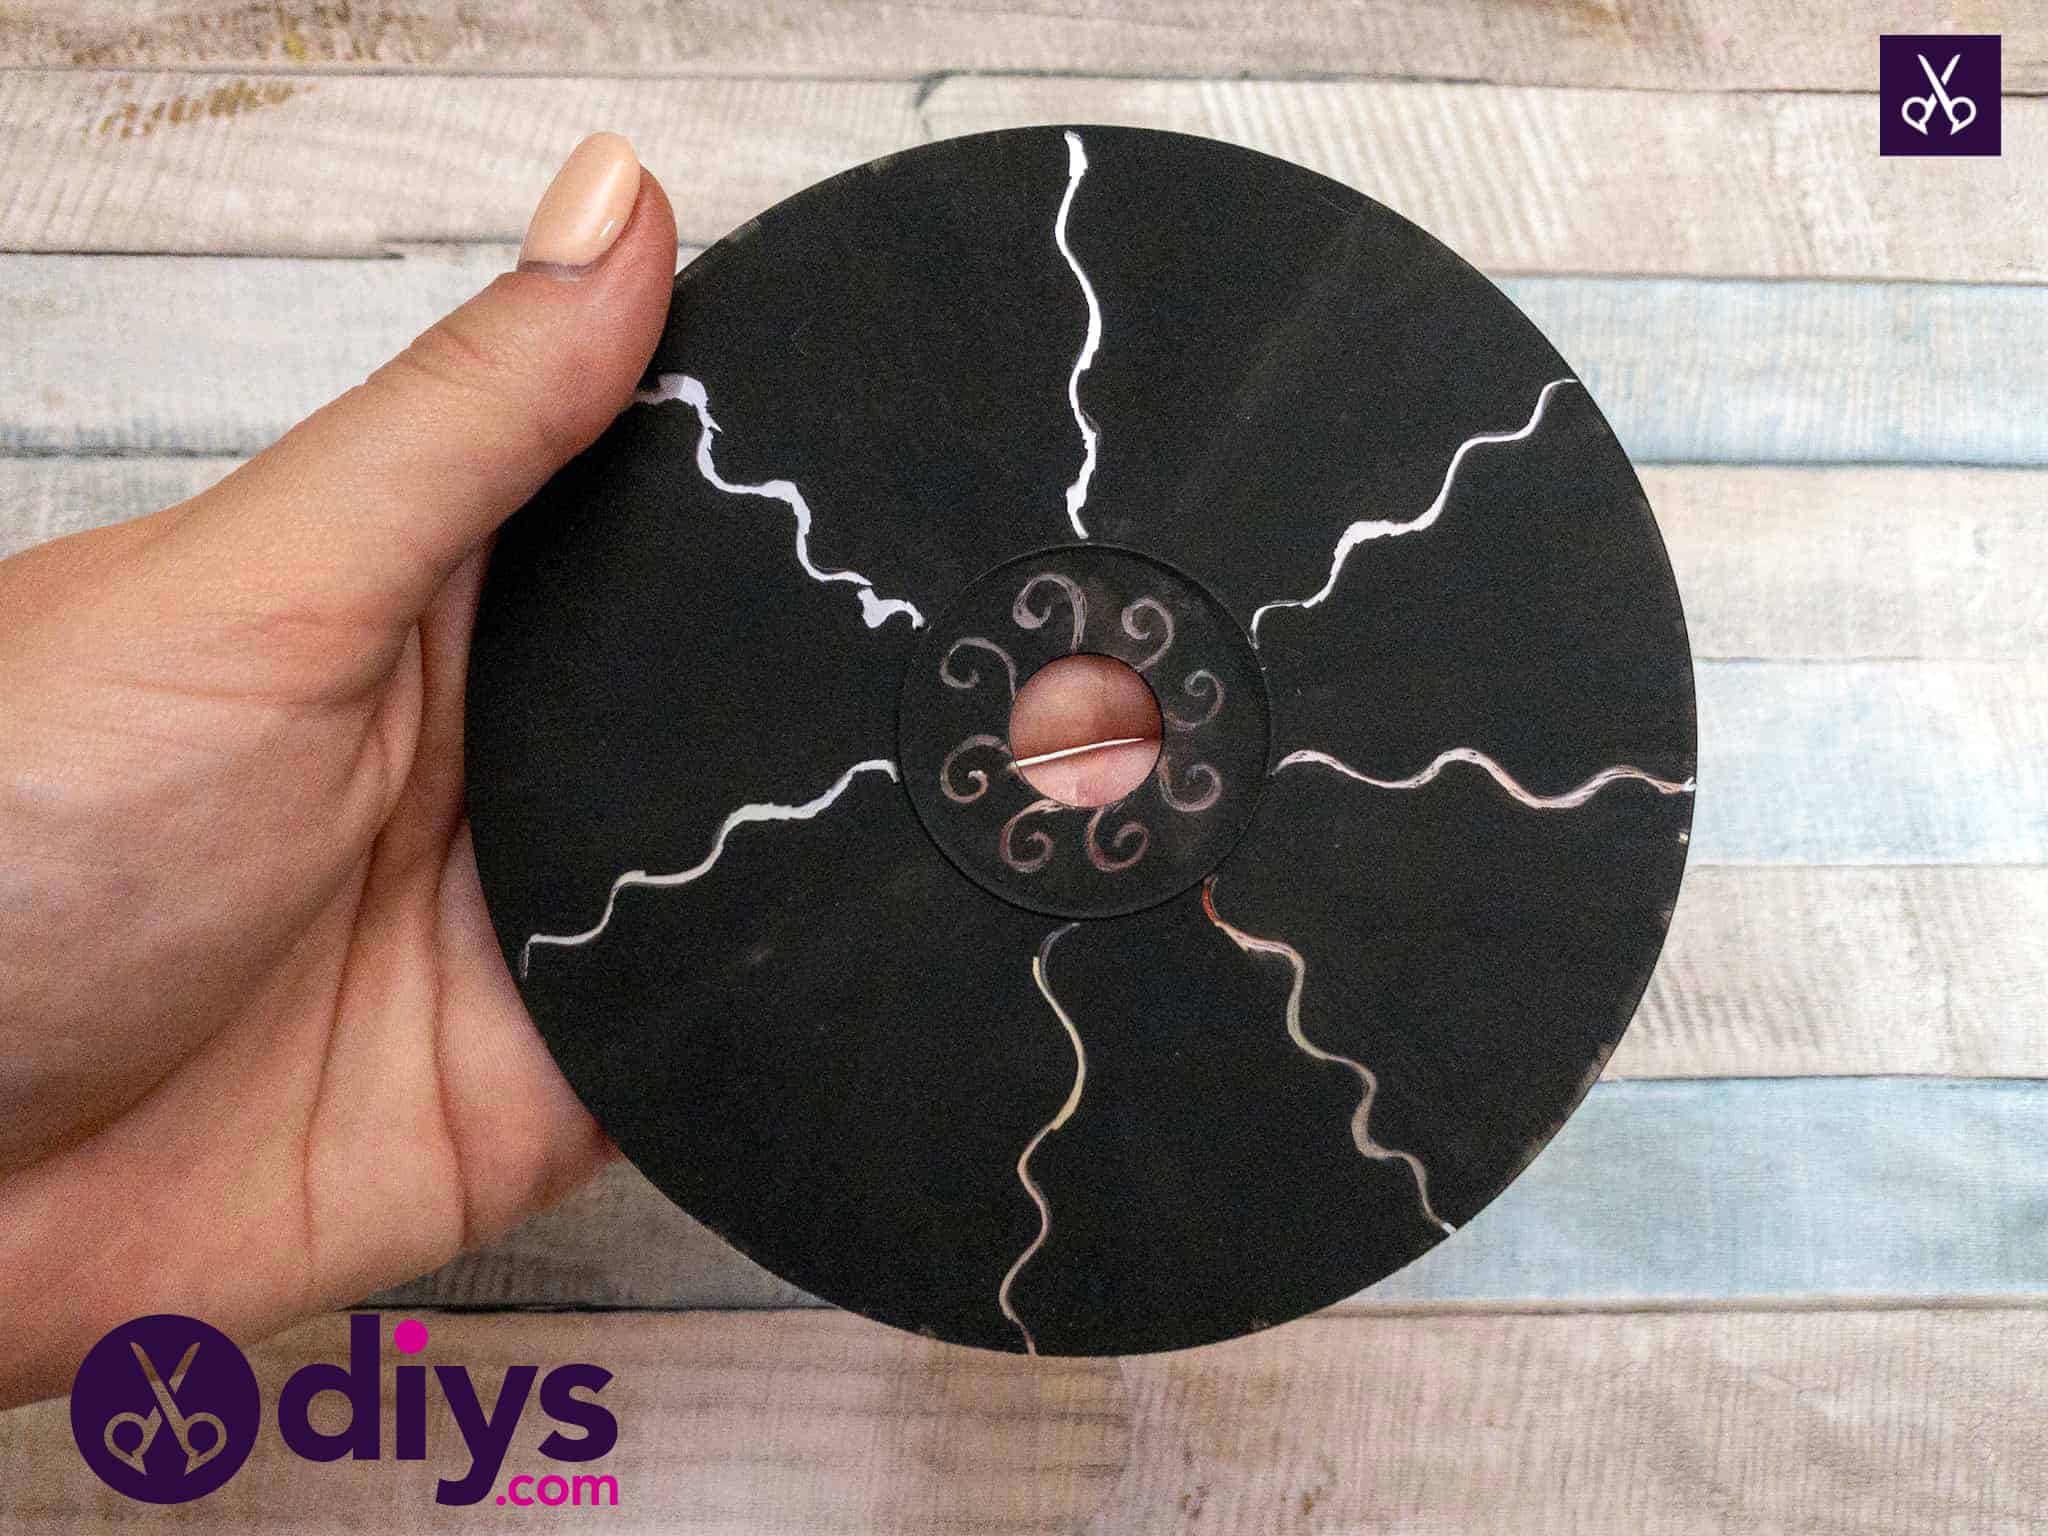 Simple how to make recycled cd art